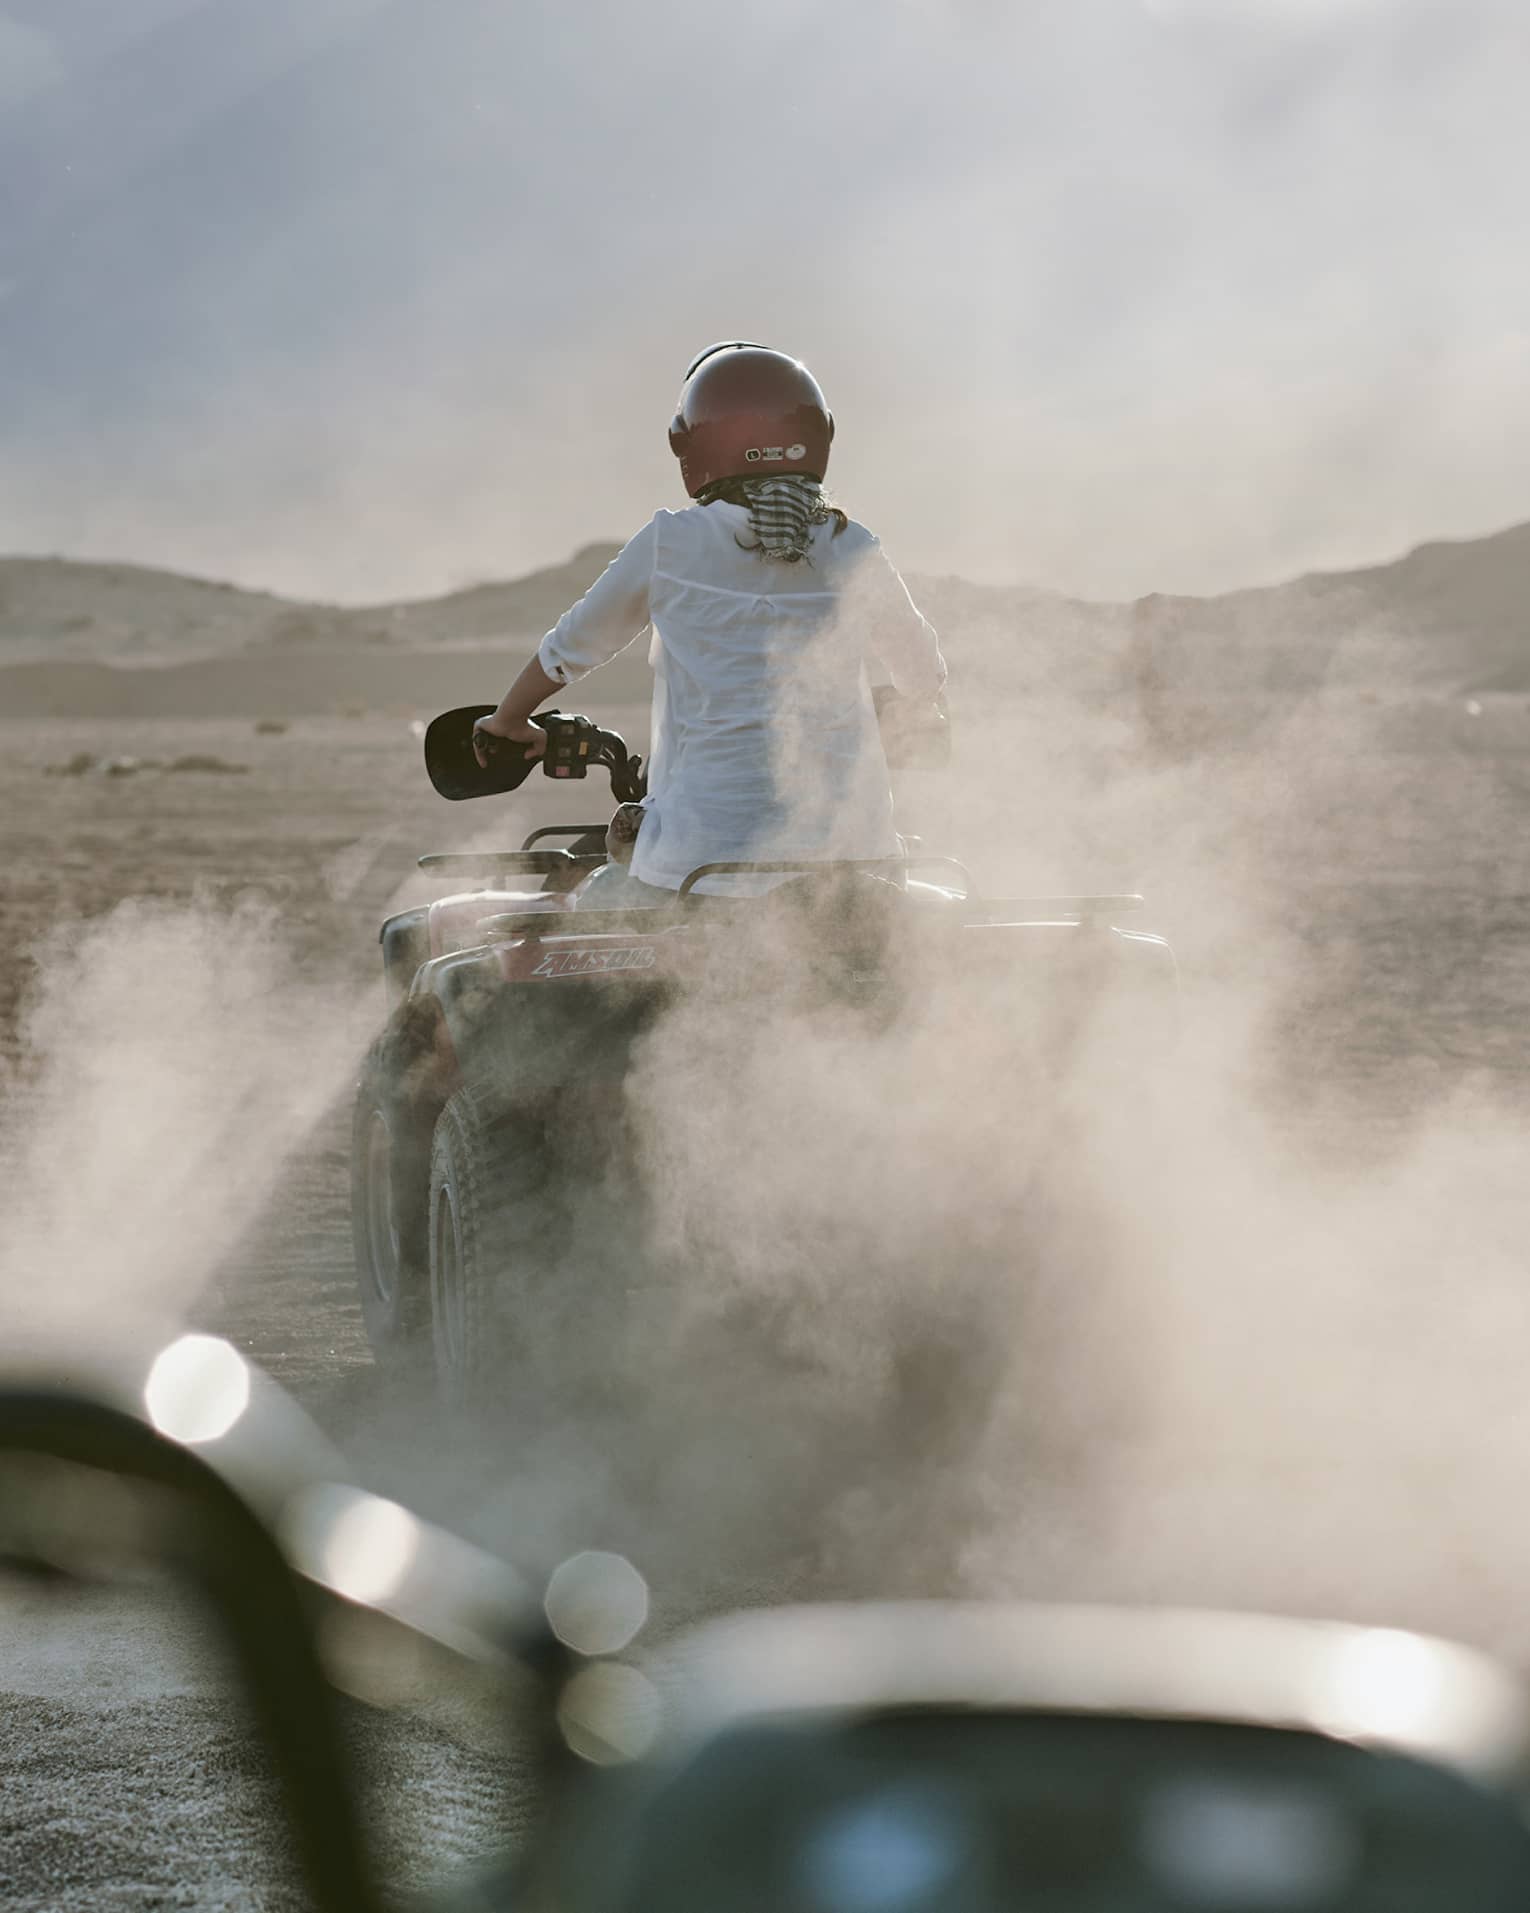 Rear view of an adventurer donning a red helmet while riding an ATV amid dust clouds; desert mountains ahead in the distance.